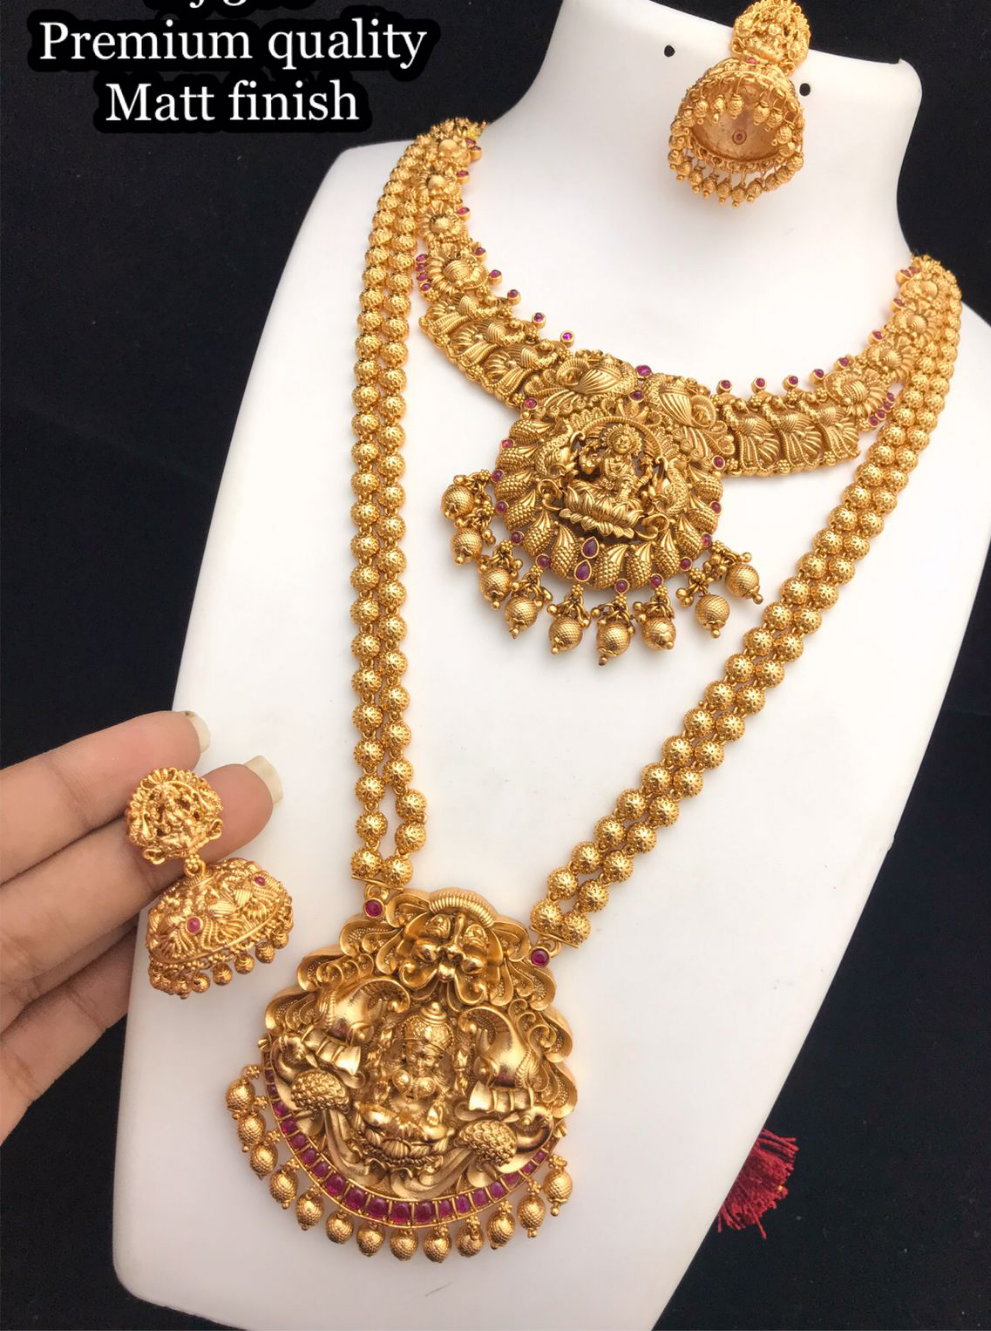 Neckset (short and long) with Jhumkas